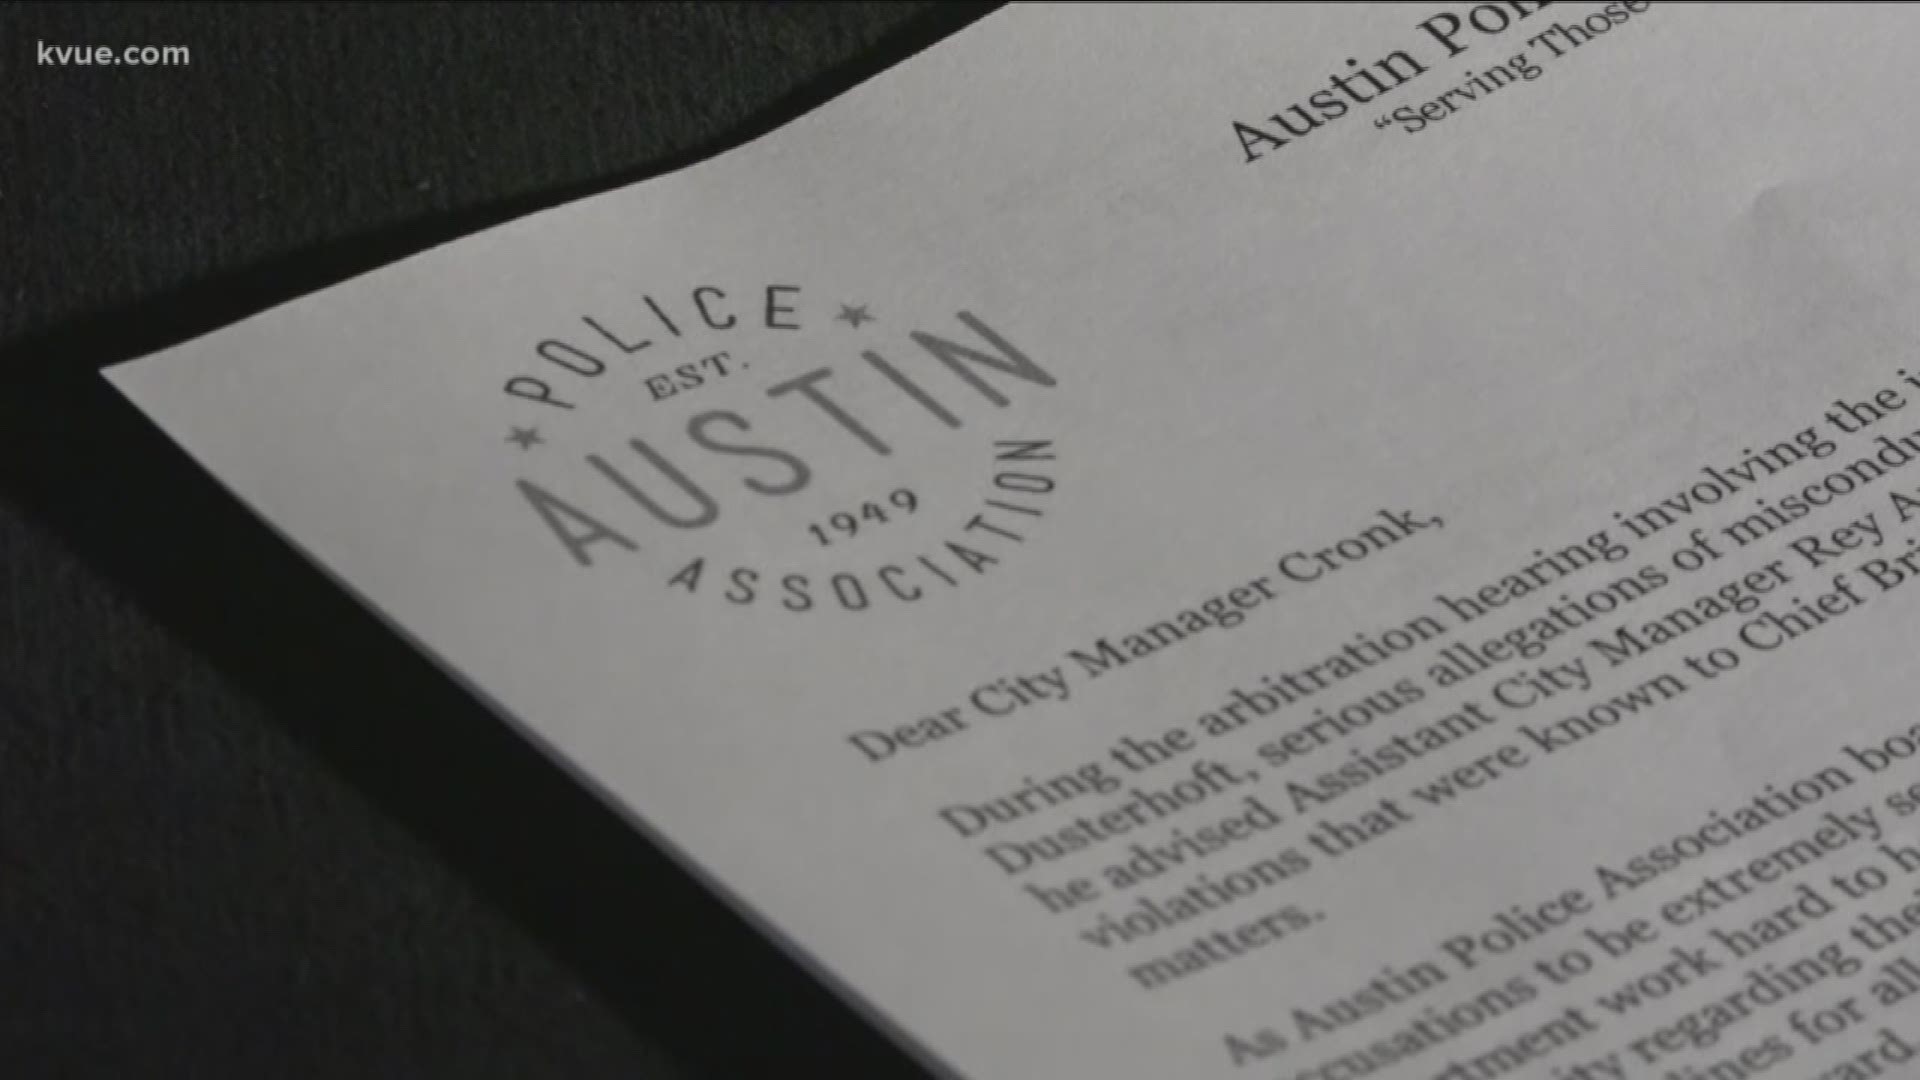 Austin's city manager is checking into claims that the police chief and one of the assistant city managers looked the other way after misconduct allegations.